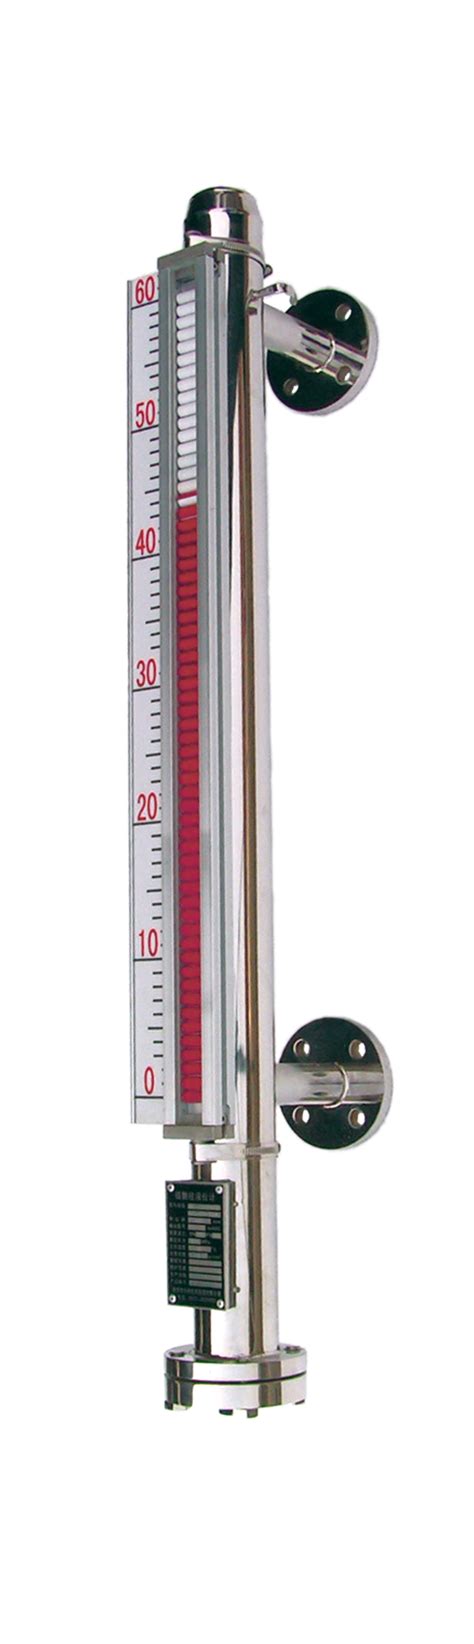 Introduction To The Magnetic Levitation Level Gauge What Kind Of Instrument Is The Magnetic